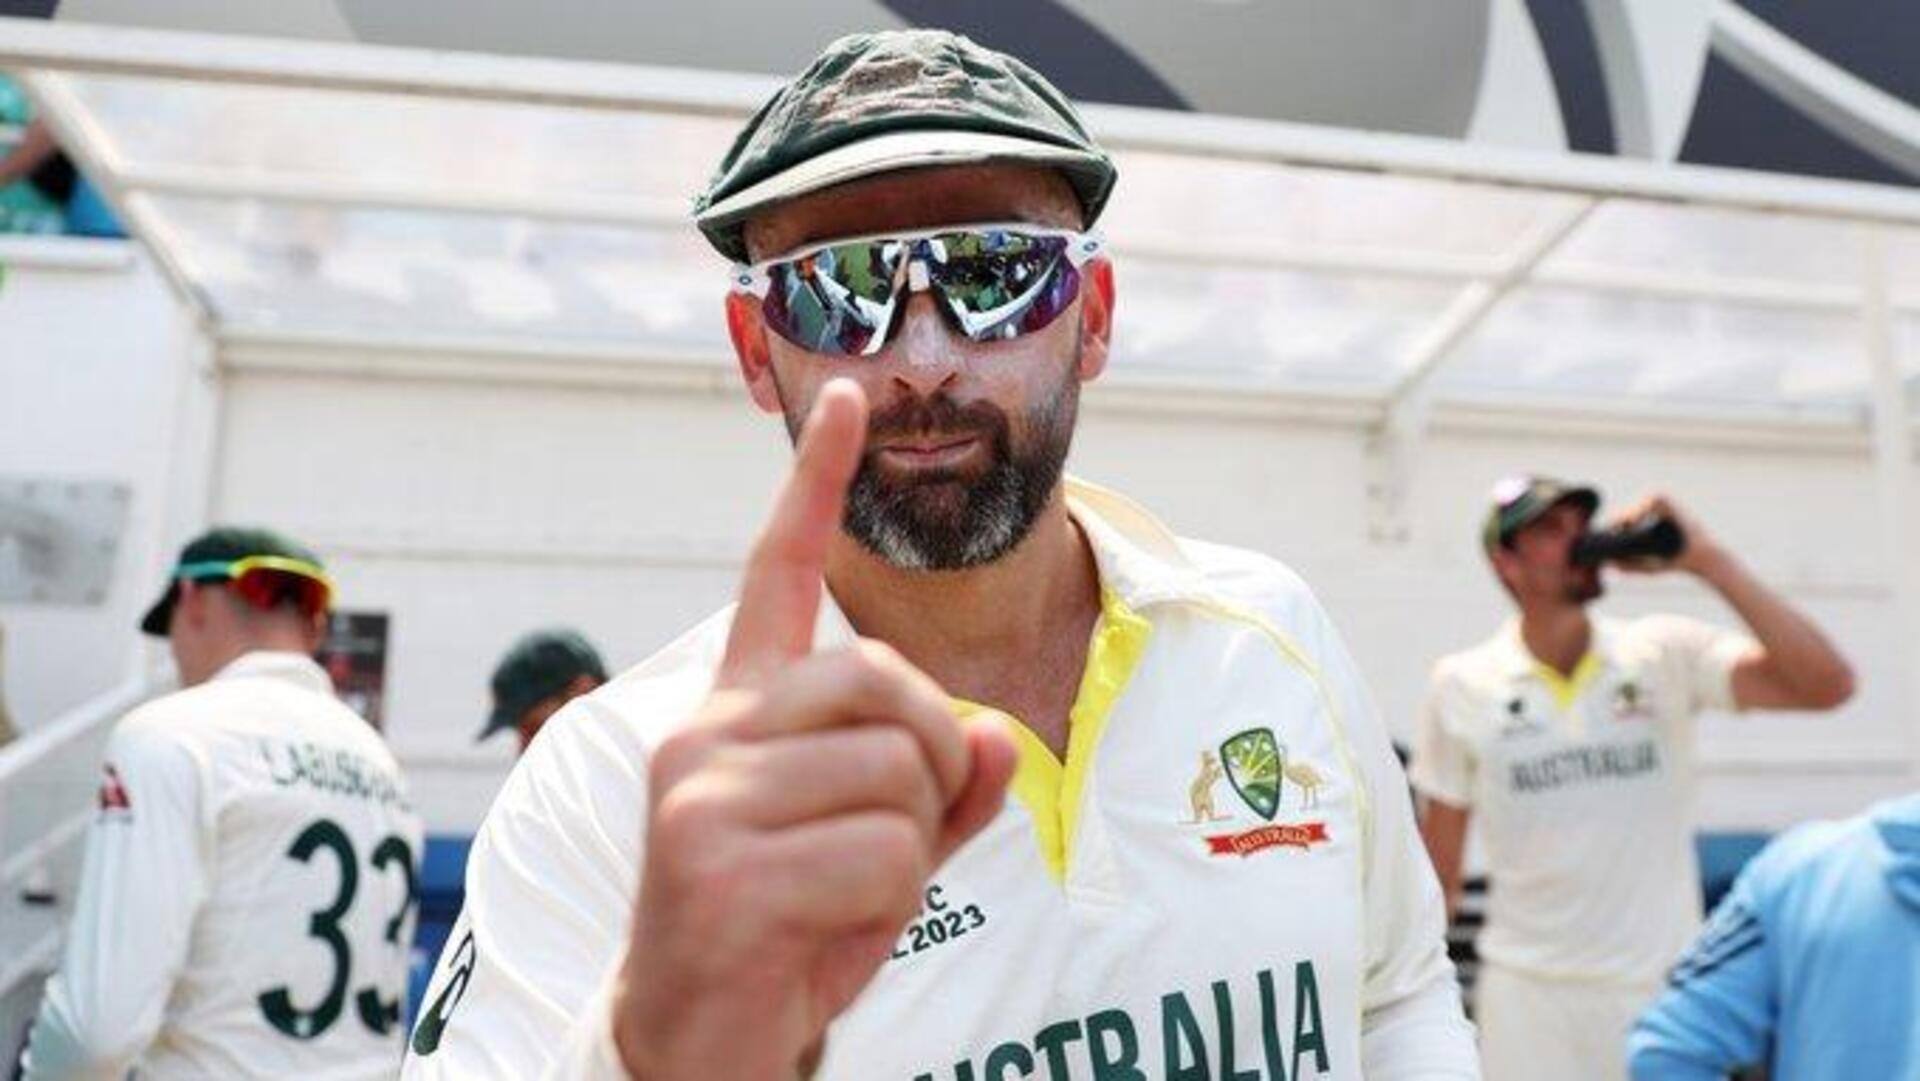 Nathan Lyon completes 50 Test wickets against Pakistan: Stats